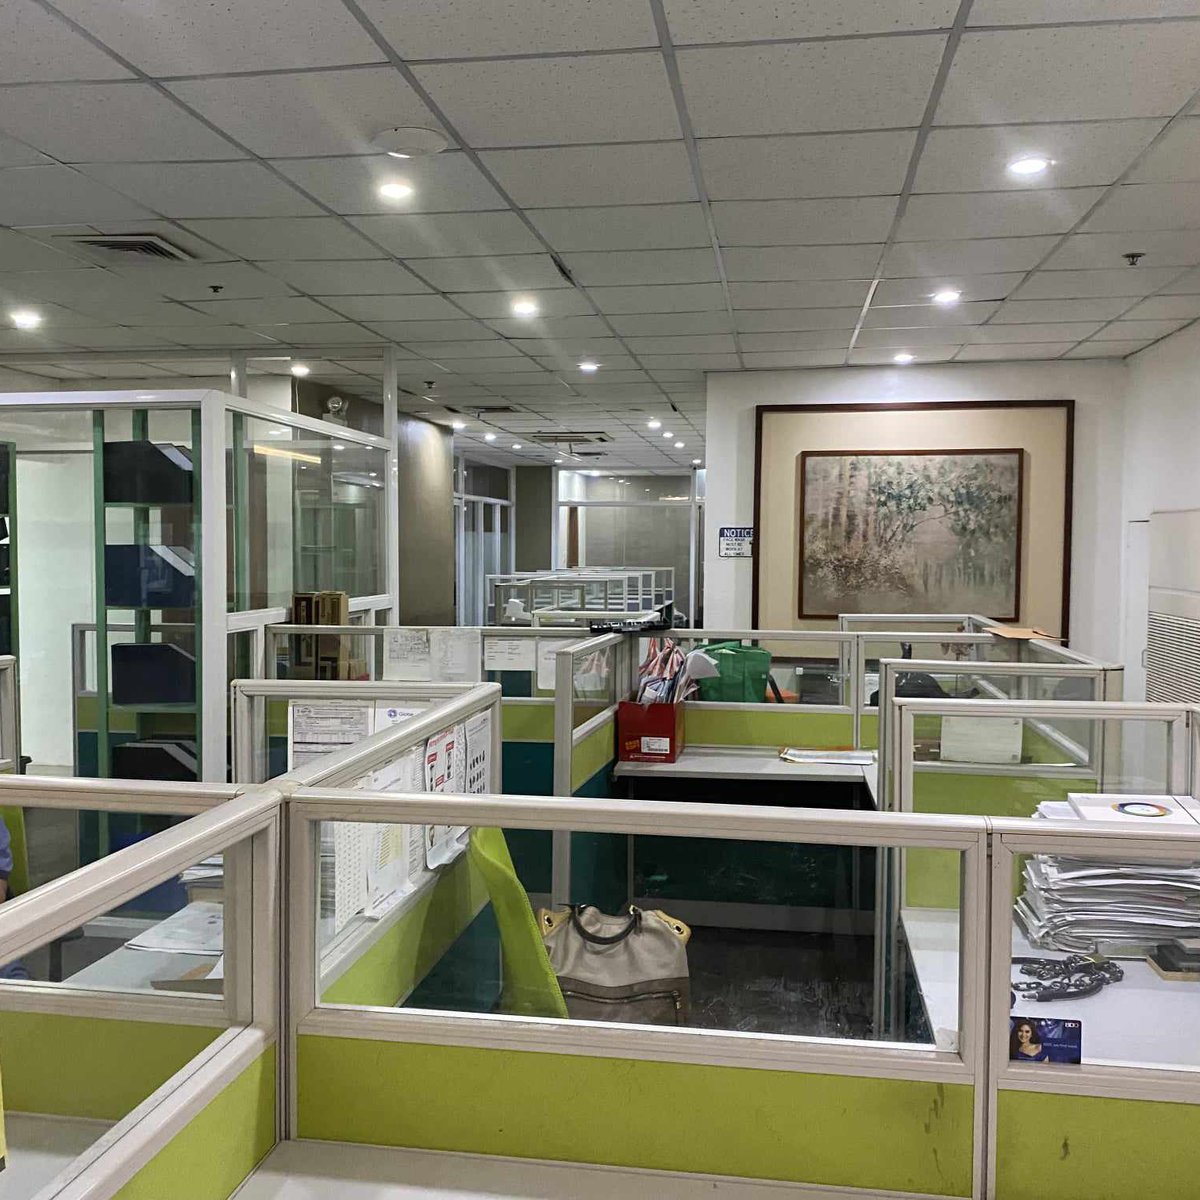 For Rent Lease BPO Office Space Ortigas Center Pasig 280sqm